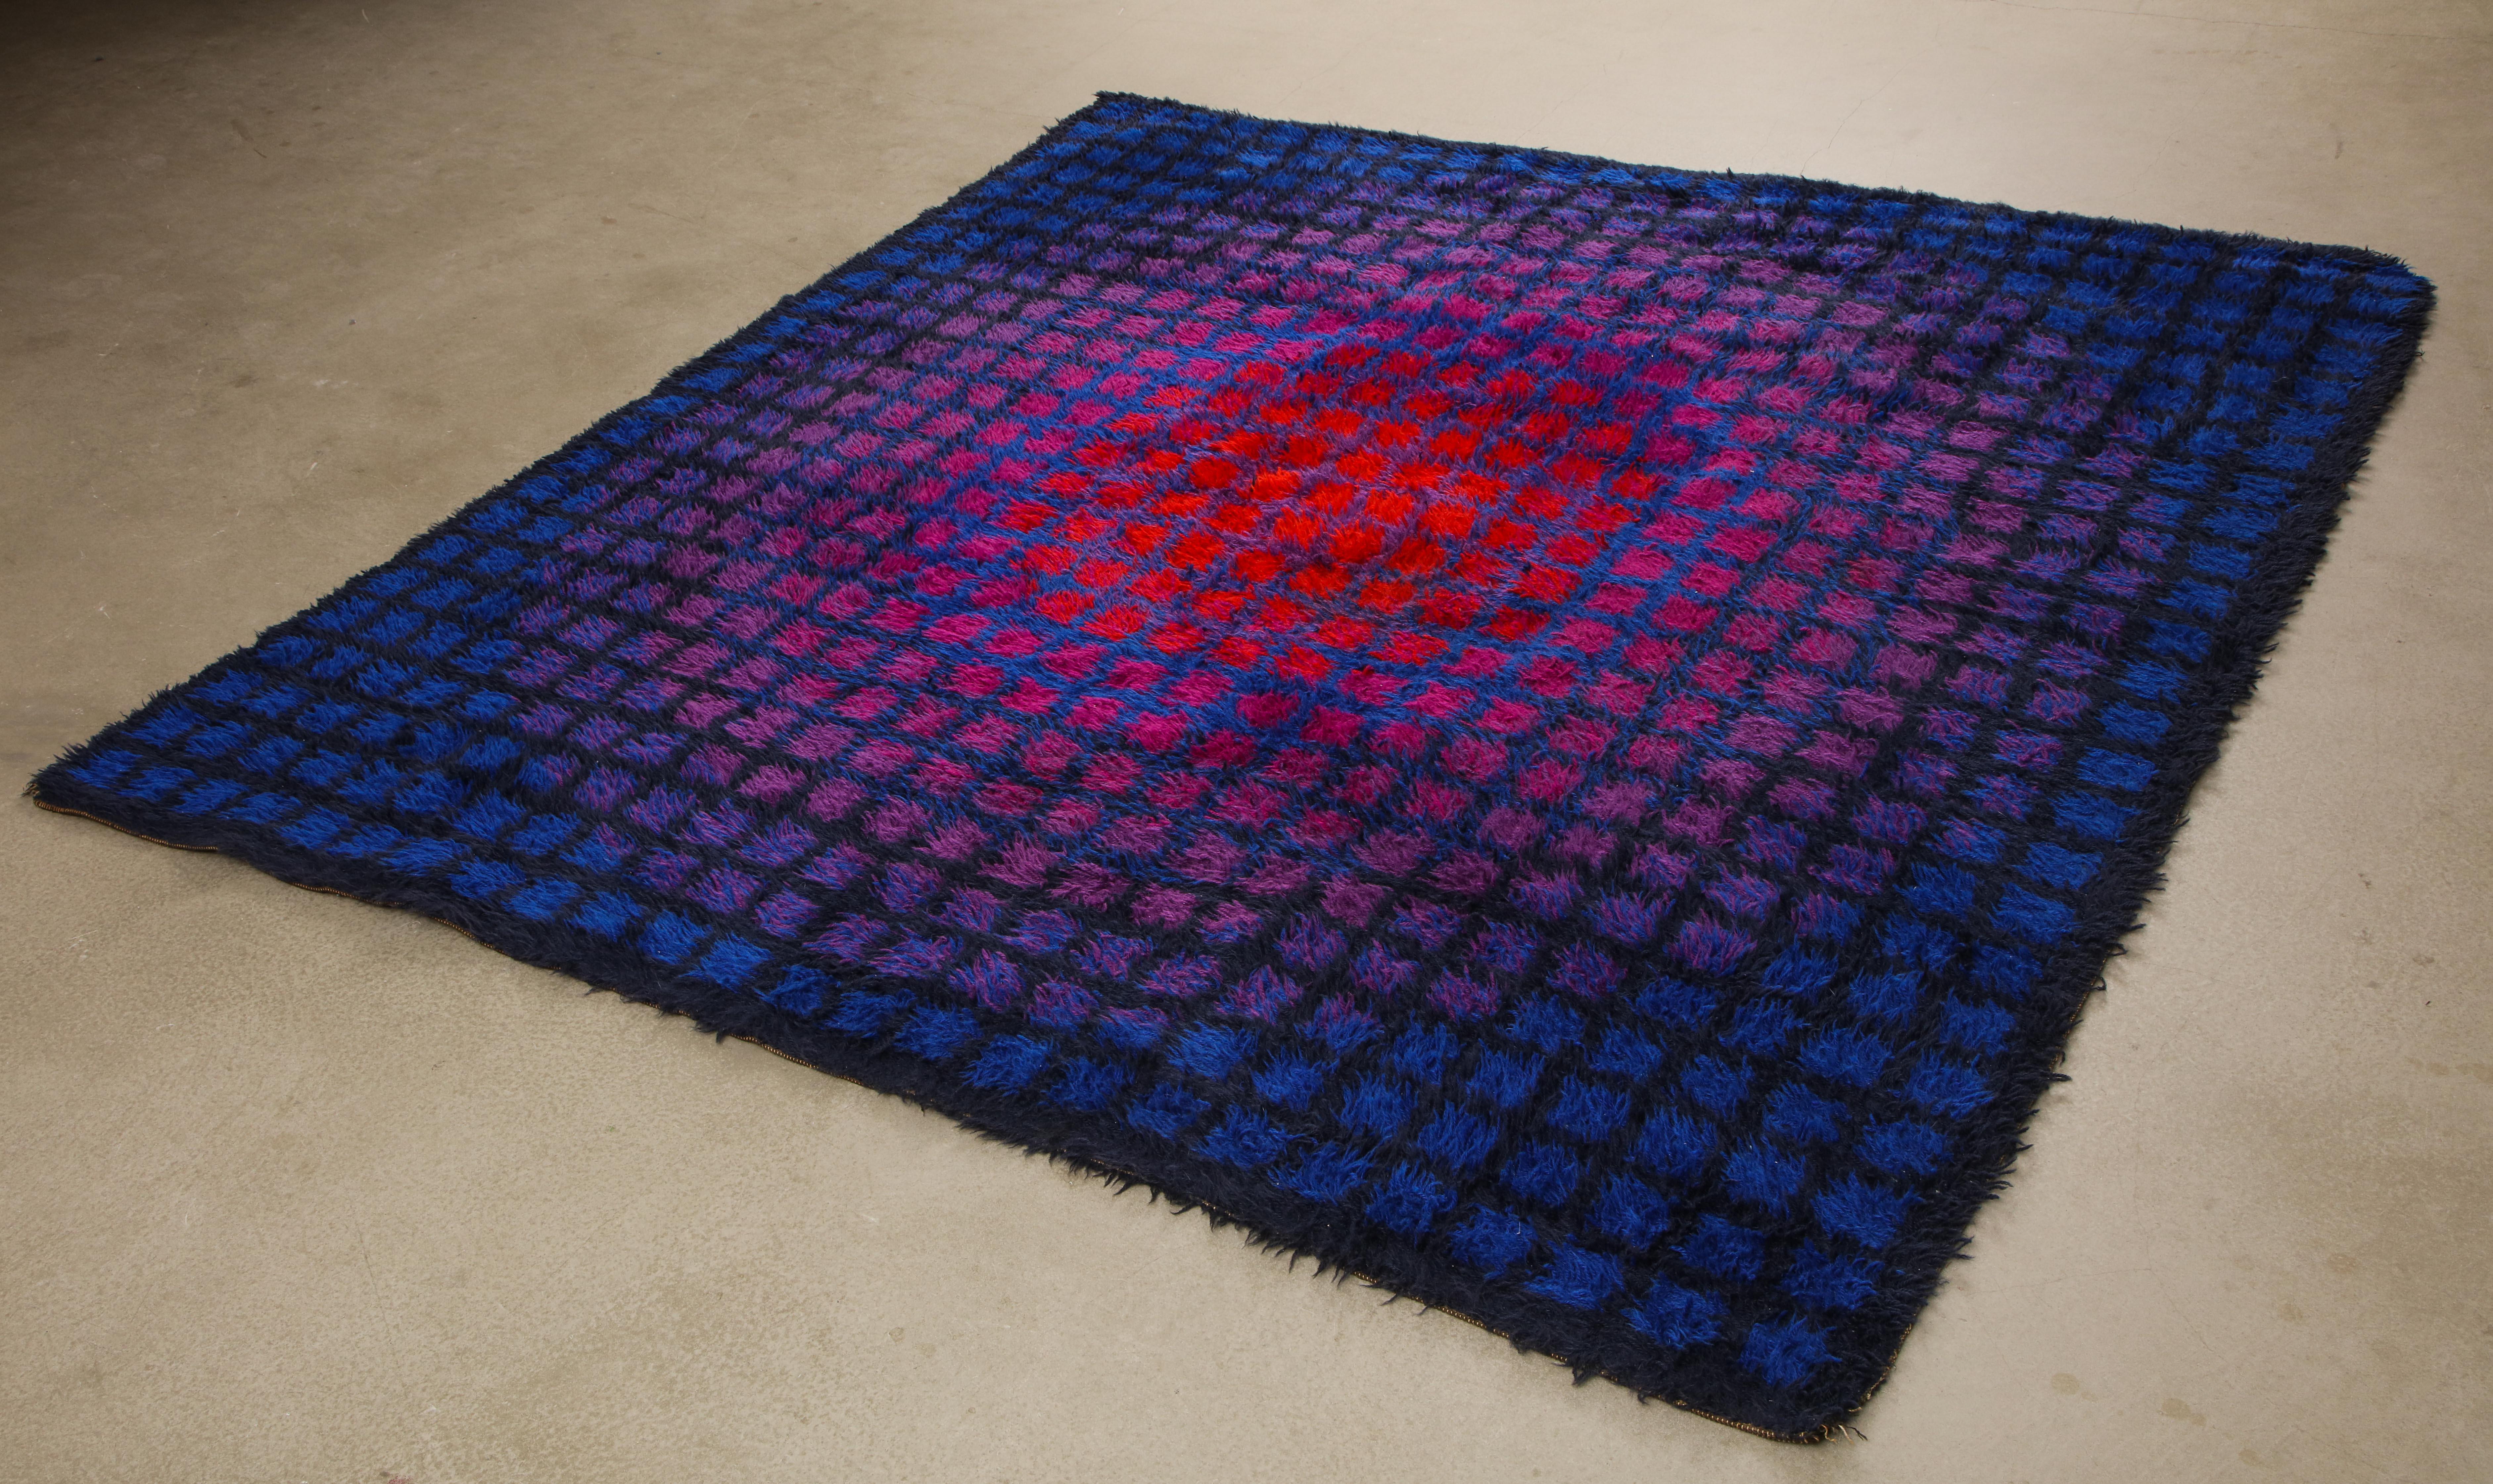 Large, square-format, long pile rya rug of Scottish and New Zealand wool. Made by the renowned Danish textile company Unika Vaev, circa 1968. In the style of Verner Panton or Vasarely, who are often credited with the design. The red-purple-blue